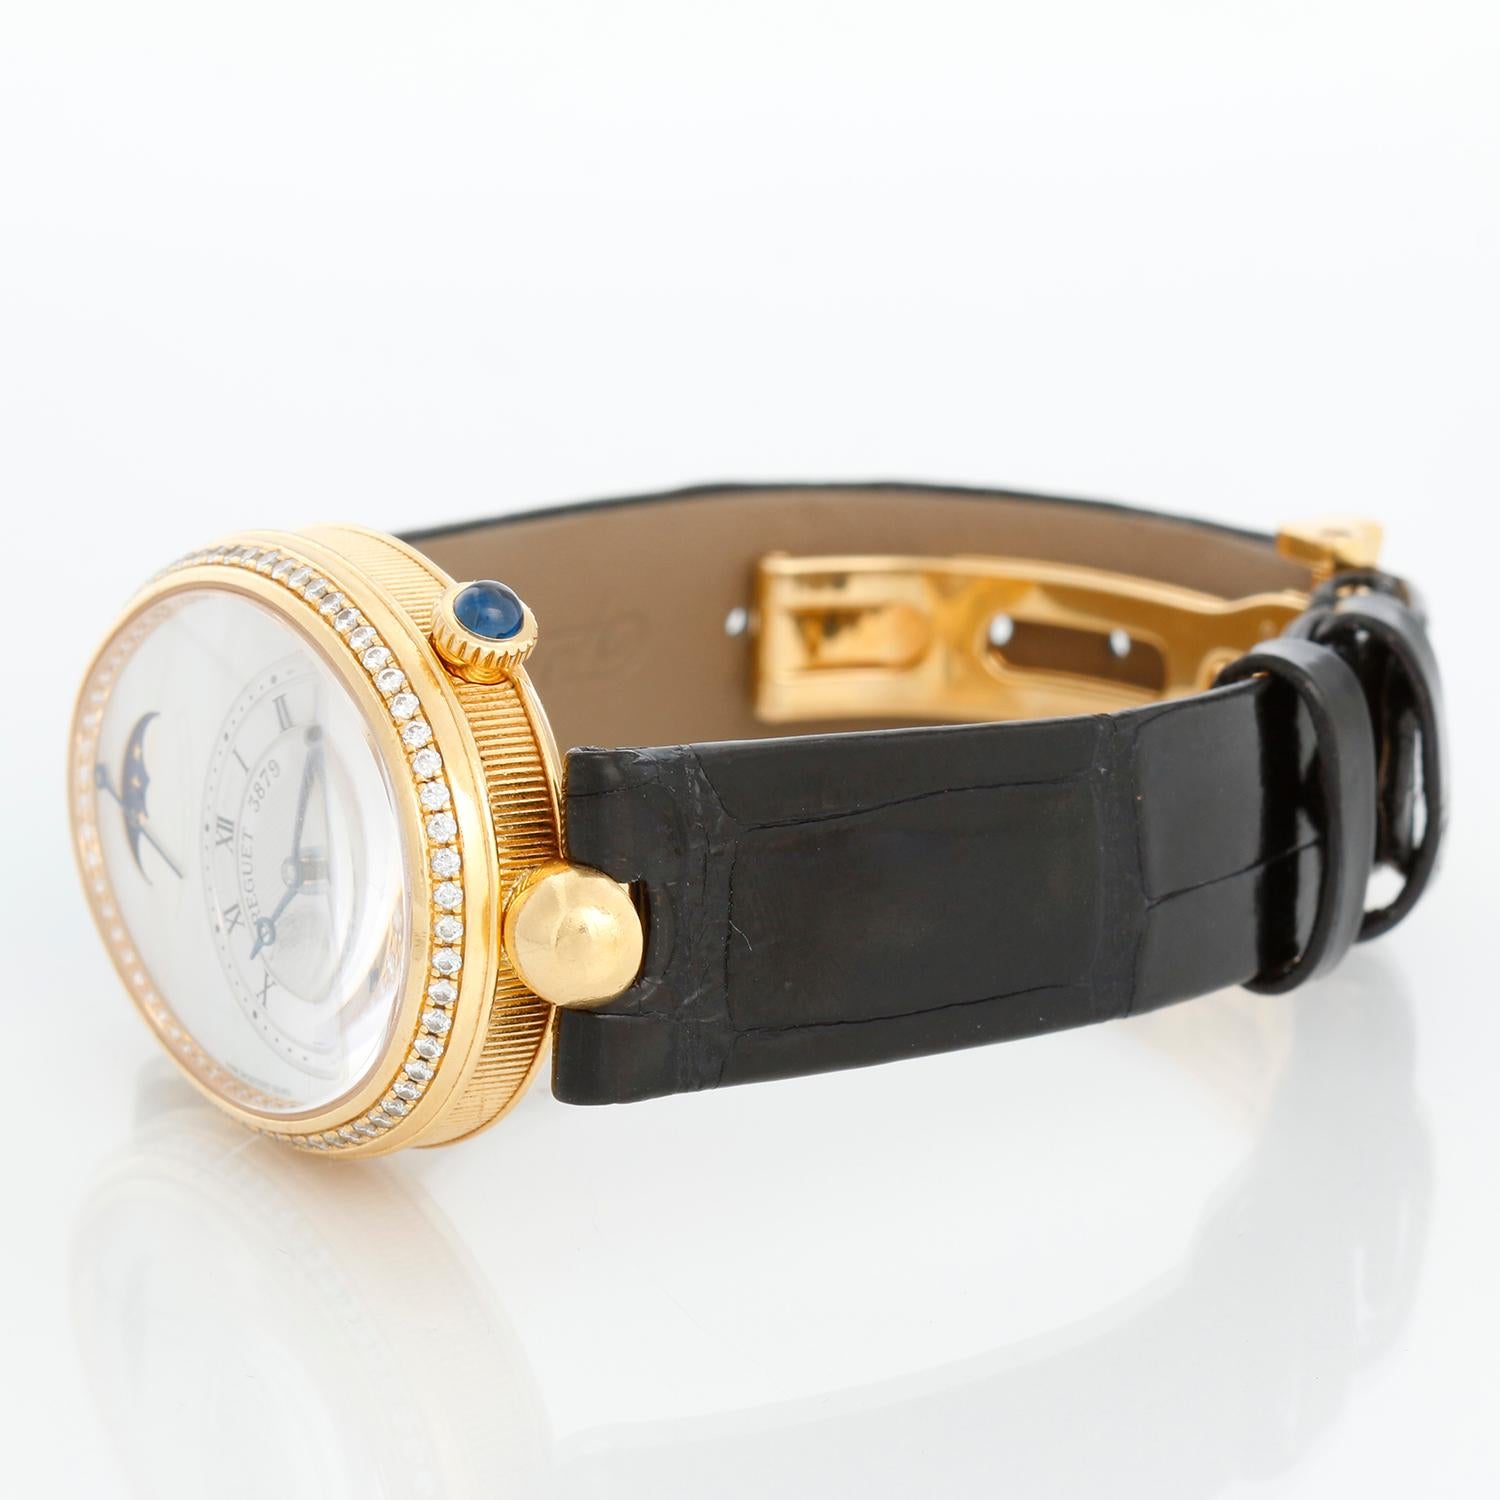 Breguet Reine de Naples Ladies Wristwatch Ref. 8908A - Self winding movement. 18K yellow gold case with diamond bezel (28 x 36 mm ). Mother of Pearl silvered gold dial. Black Breguet leather strap with yellow gold buckle with diamonds. Pre-owned